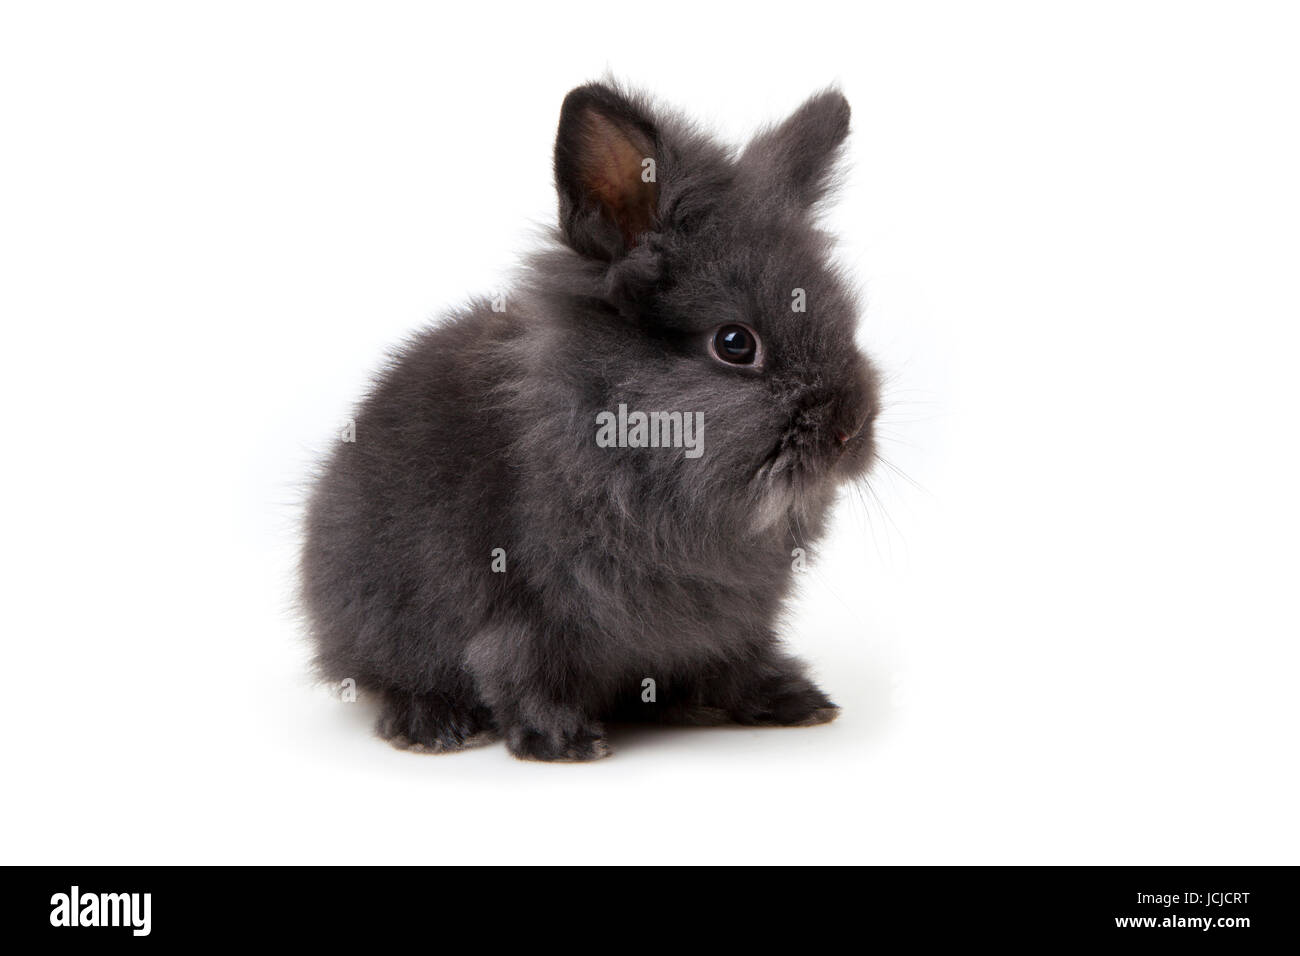 Osterhase - Easter Bunny Stock Photo